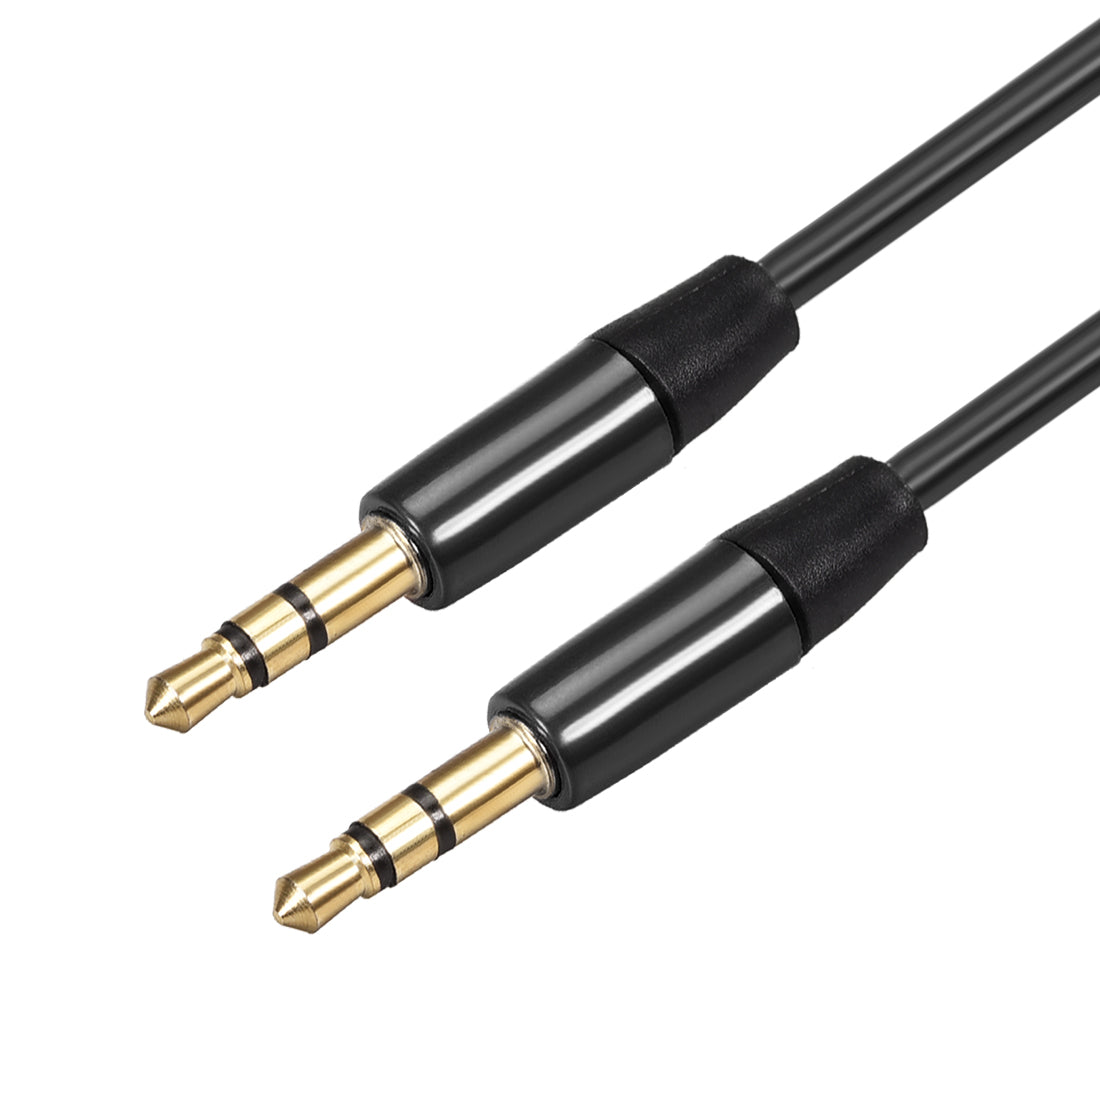 uxcell Uxcell 3.5mm Male to Male  Cable Stereo  Extension, 3 Meter Long, for Headphones Smartphones Notebooks, Black